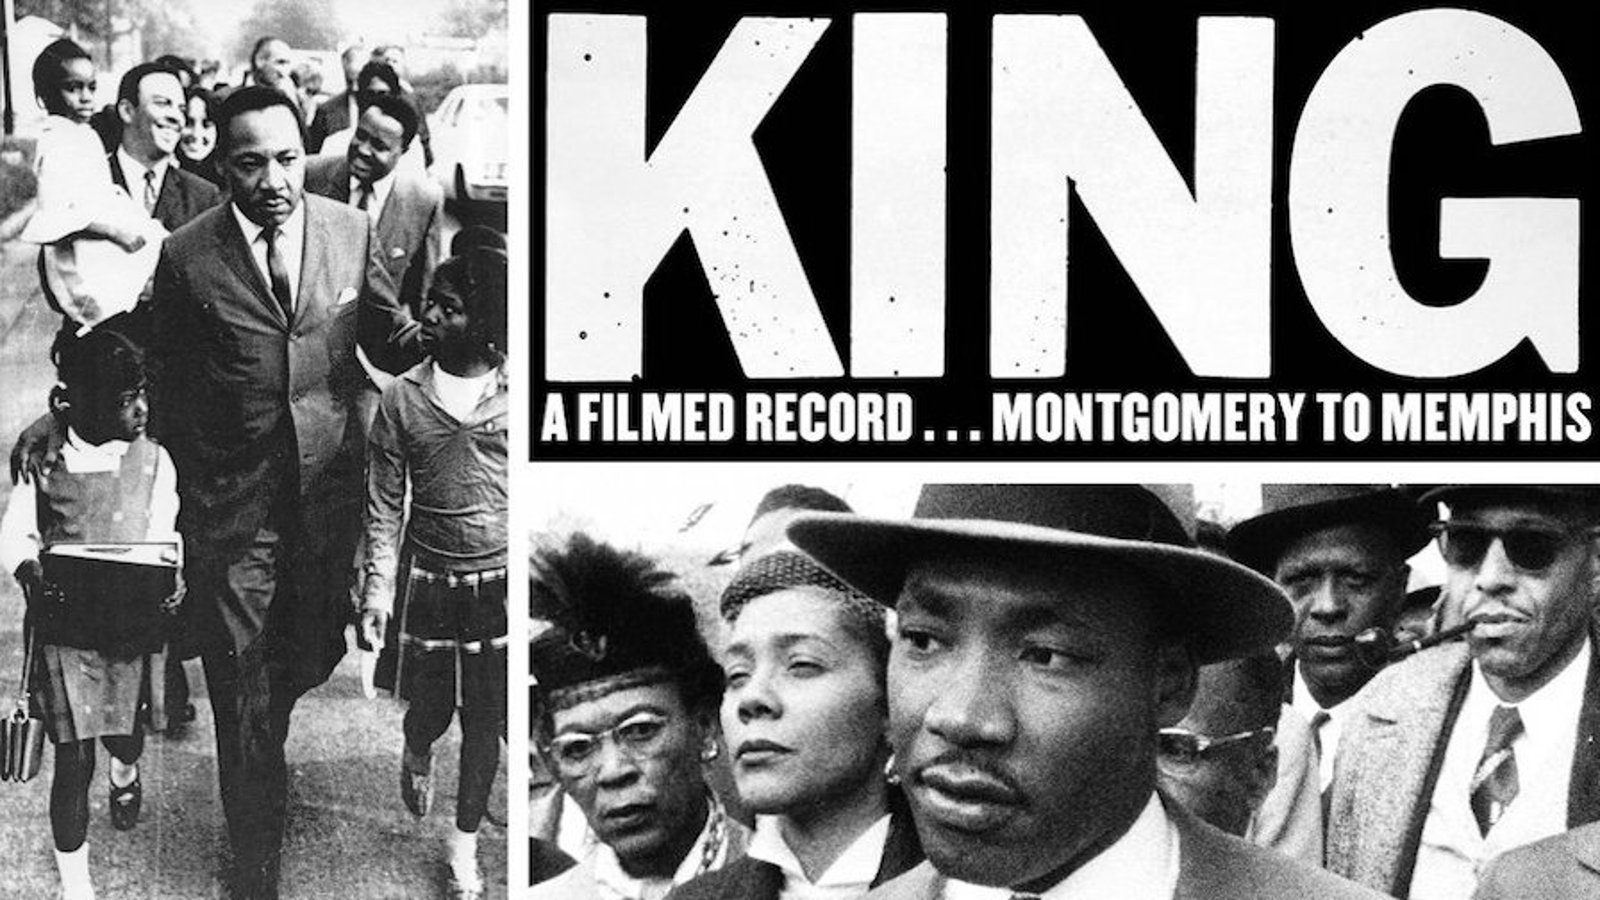 King: A Filmed Record...Montgomery To Memphis